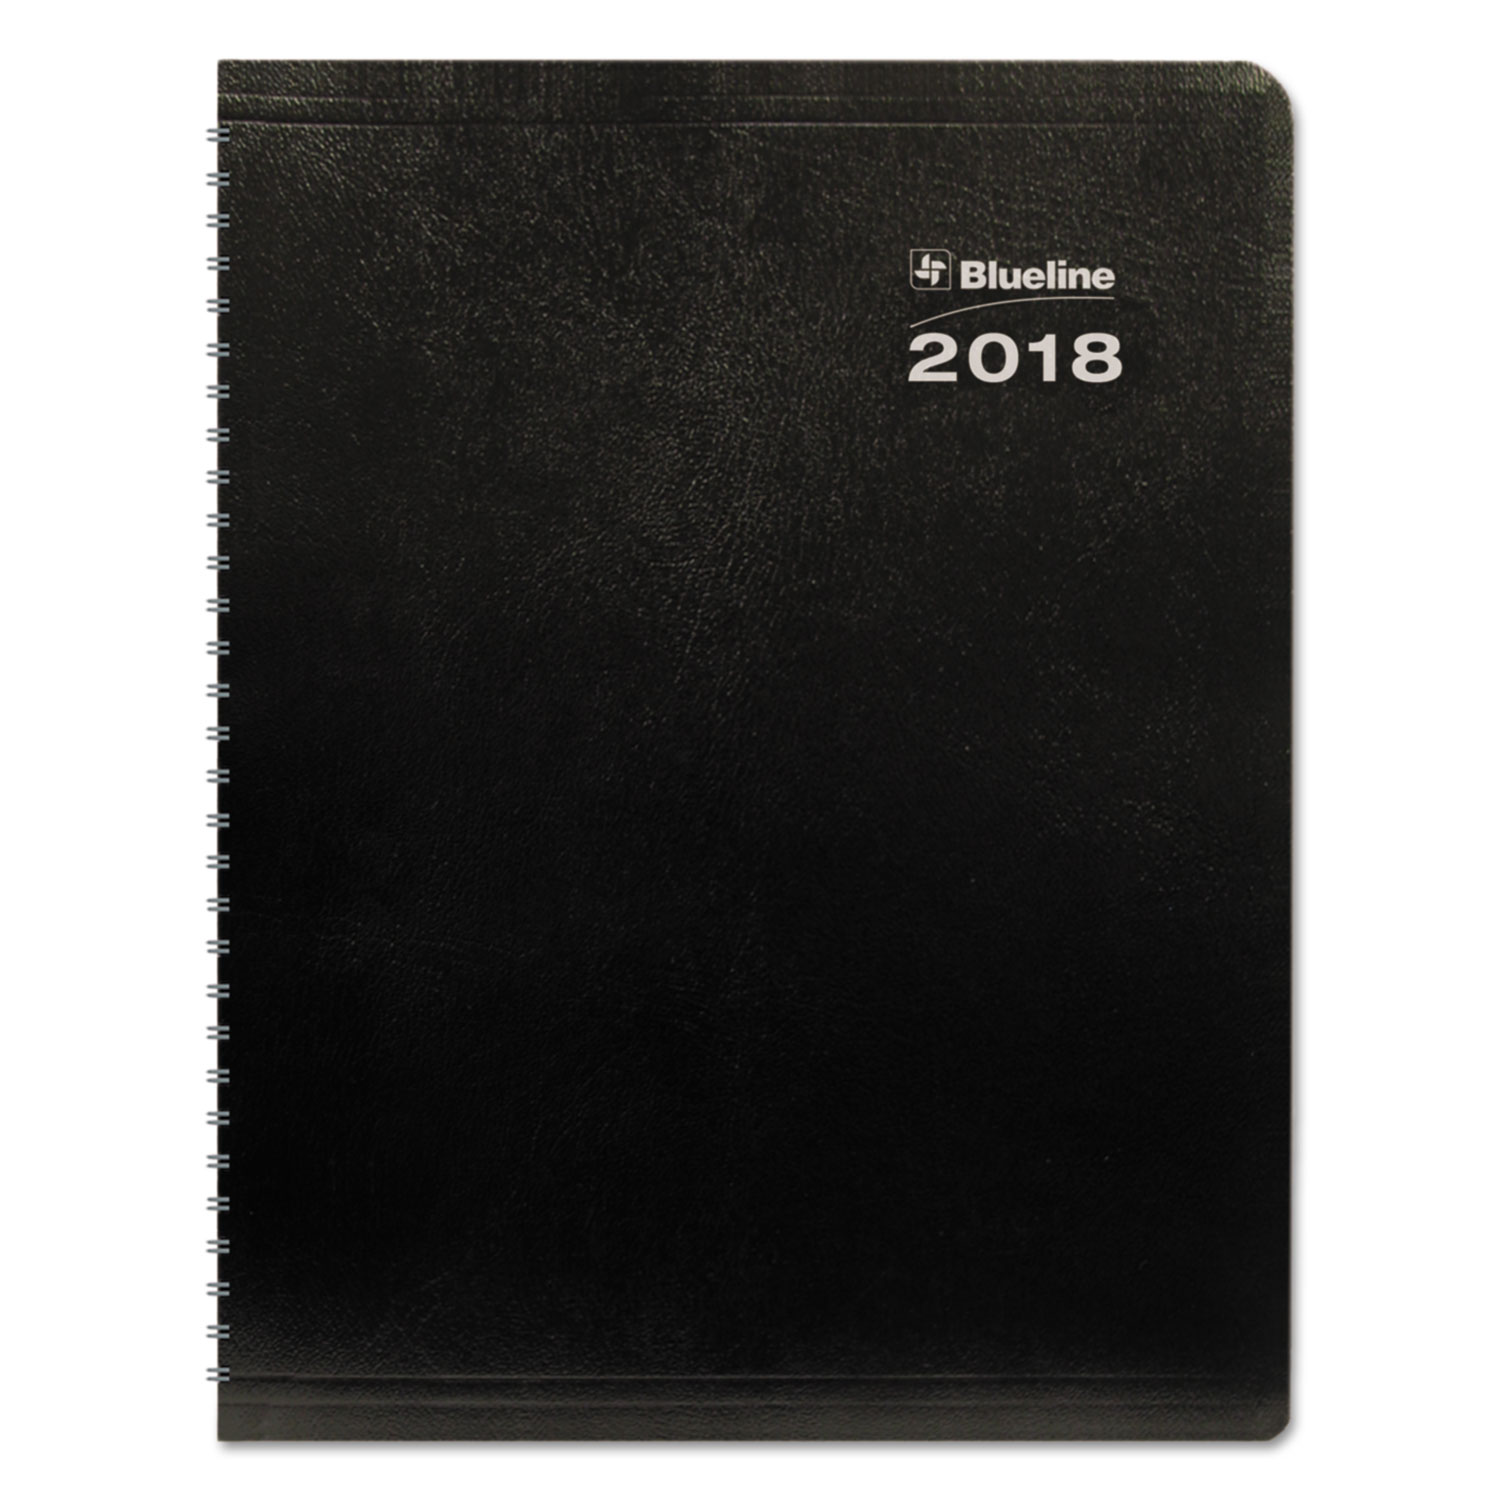 DuraGlobe Weekly Planner, 15-min Appointments, 11 x 8 1/2, Black, 2018